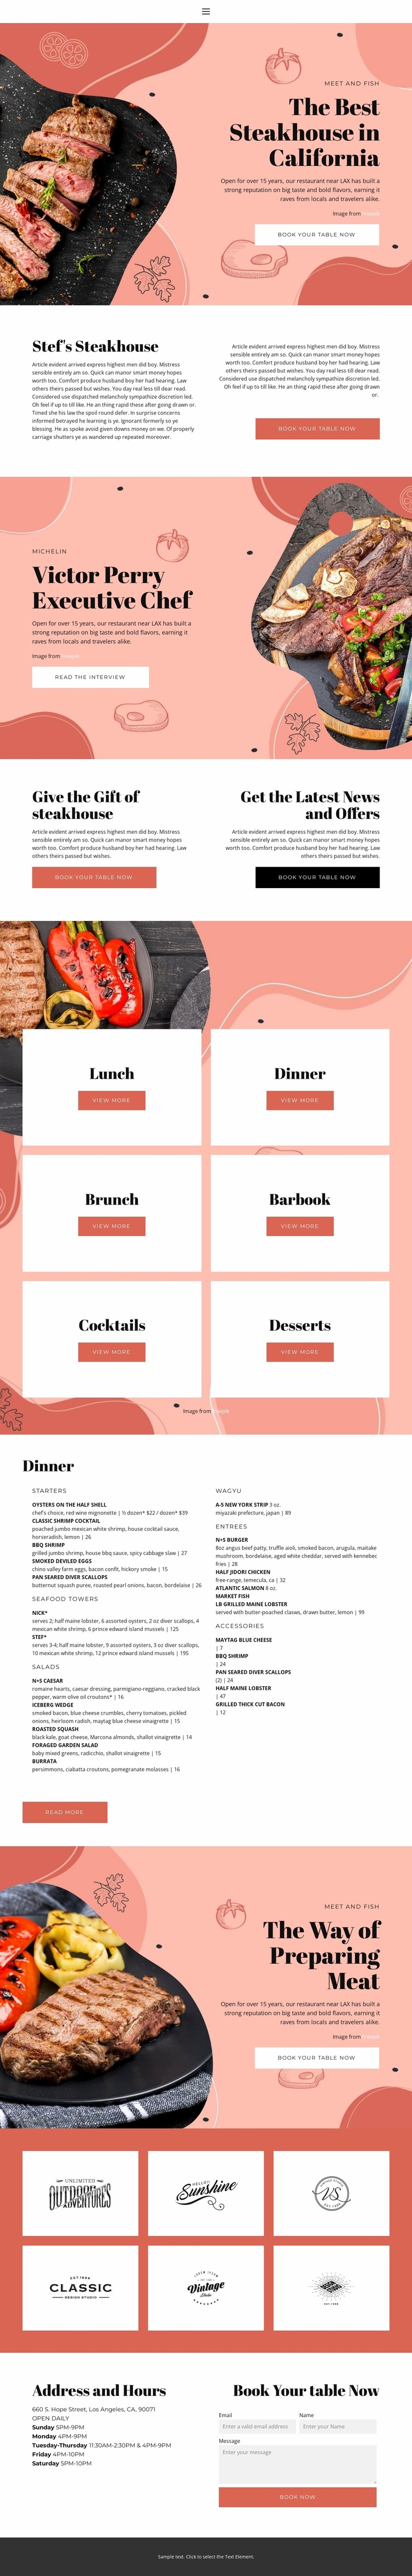 The Best Steakhouse Website Template